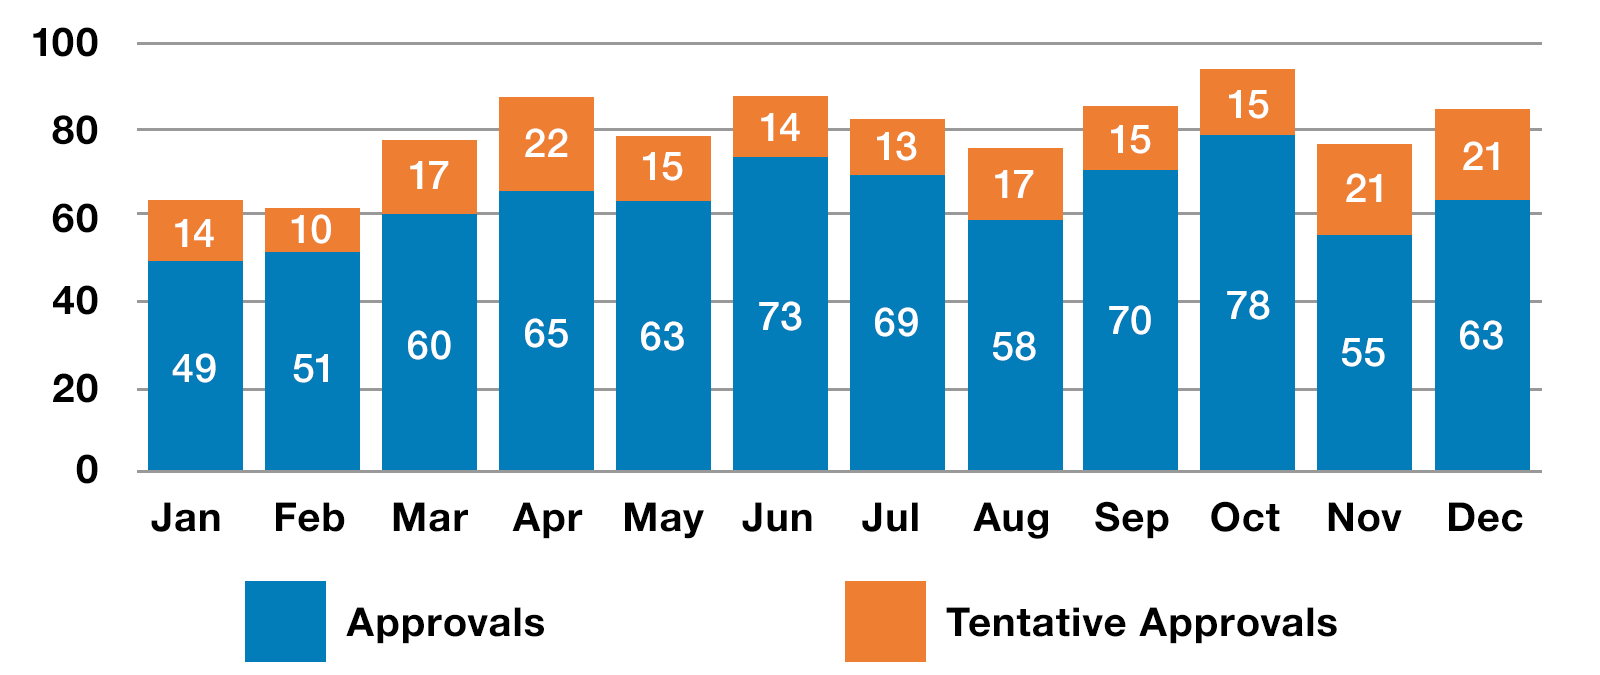 Bar graph showing the number of final generic drug approvals and tentative generic drug approvals by month in 2020